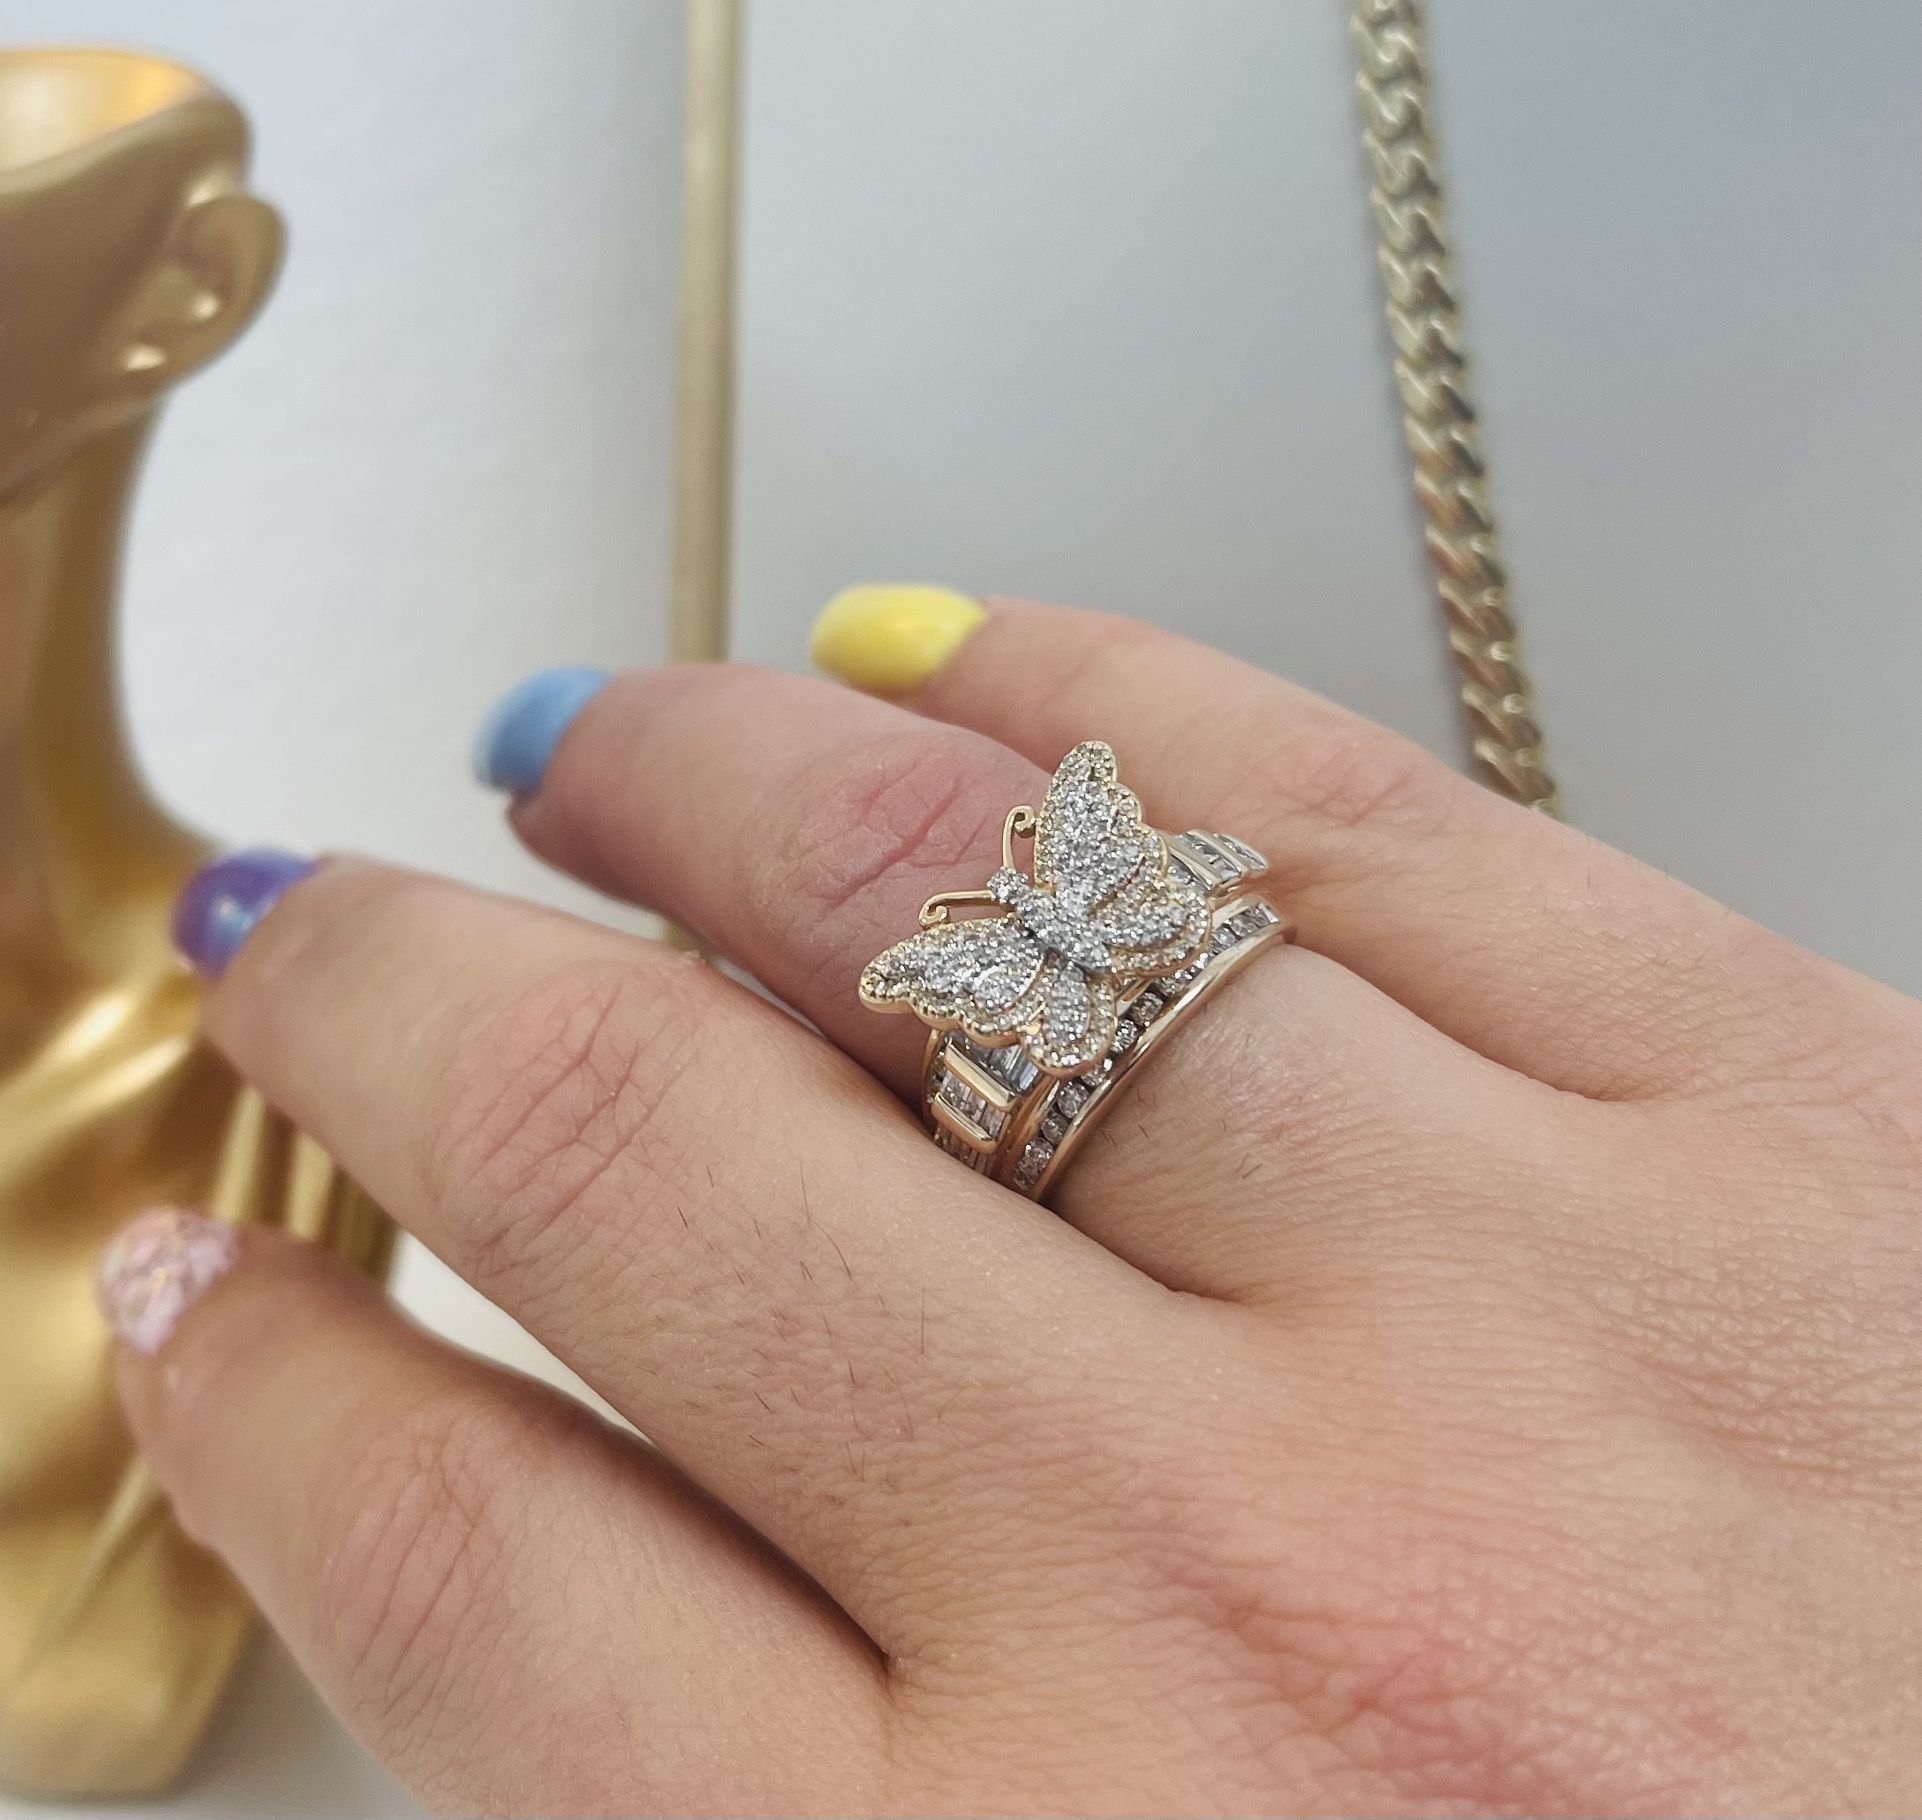 Stament Diamond Rings . 🛍️Buy now pay Later ✅No credit Check 